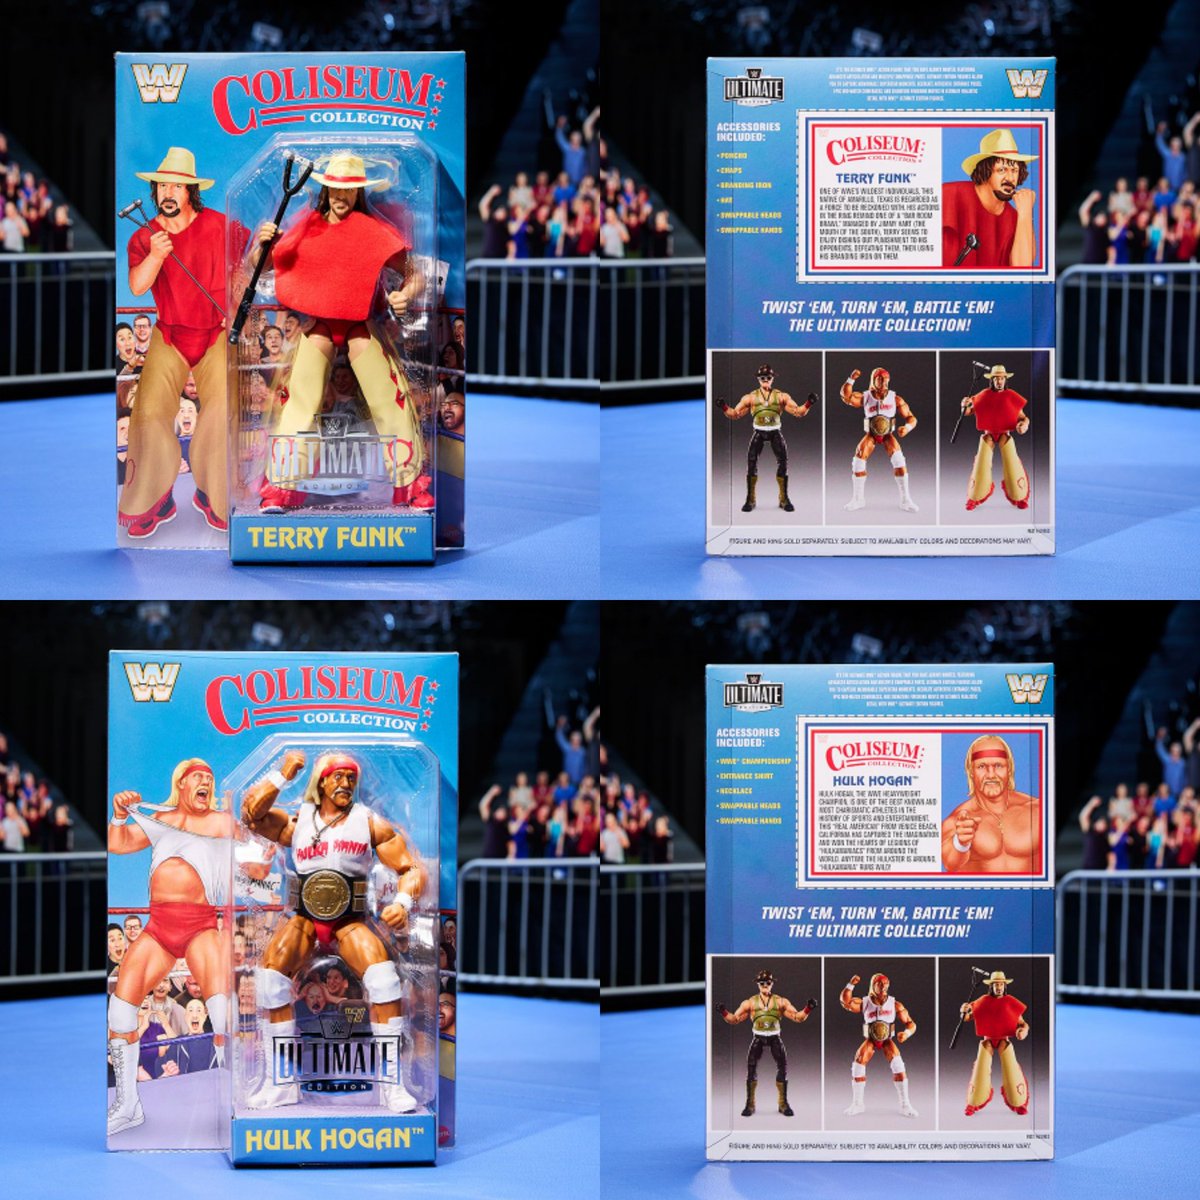 New images of @Mattel's Ultimate Edition Mattel Creations Exclusive Coliseum Collection Wave 1! Featuring @TheDirtyFunker and @HulkHogan! On sale Friday, November 11 at 12pm ET on MattelCreations.com! #WWEEliteSquad #ScratchThatFigureItch